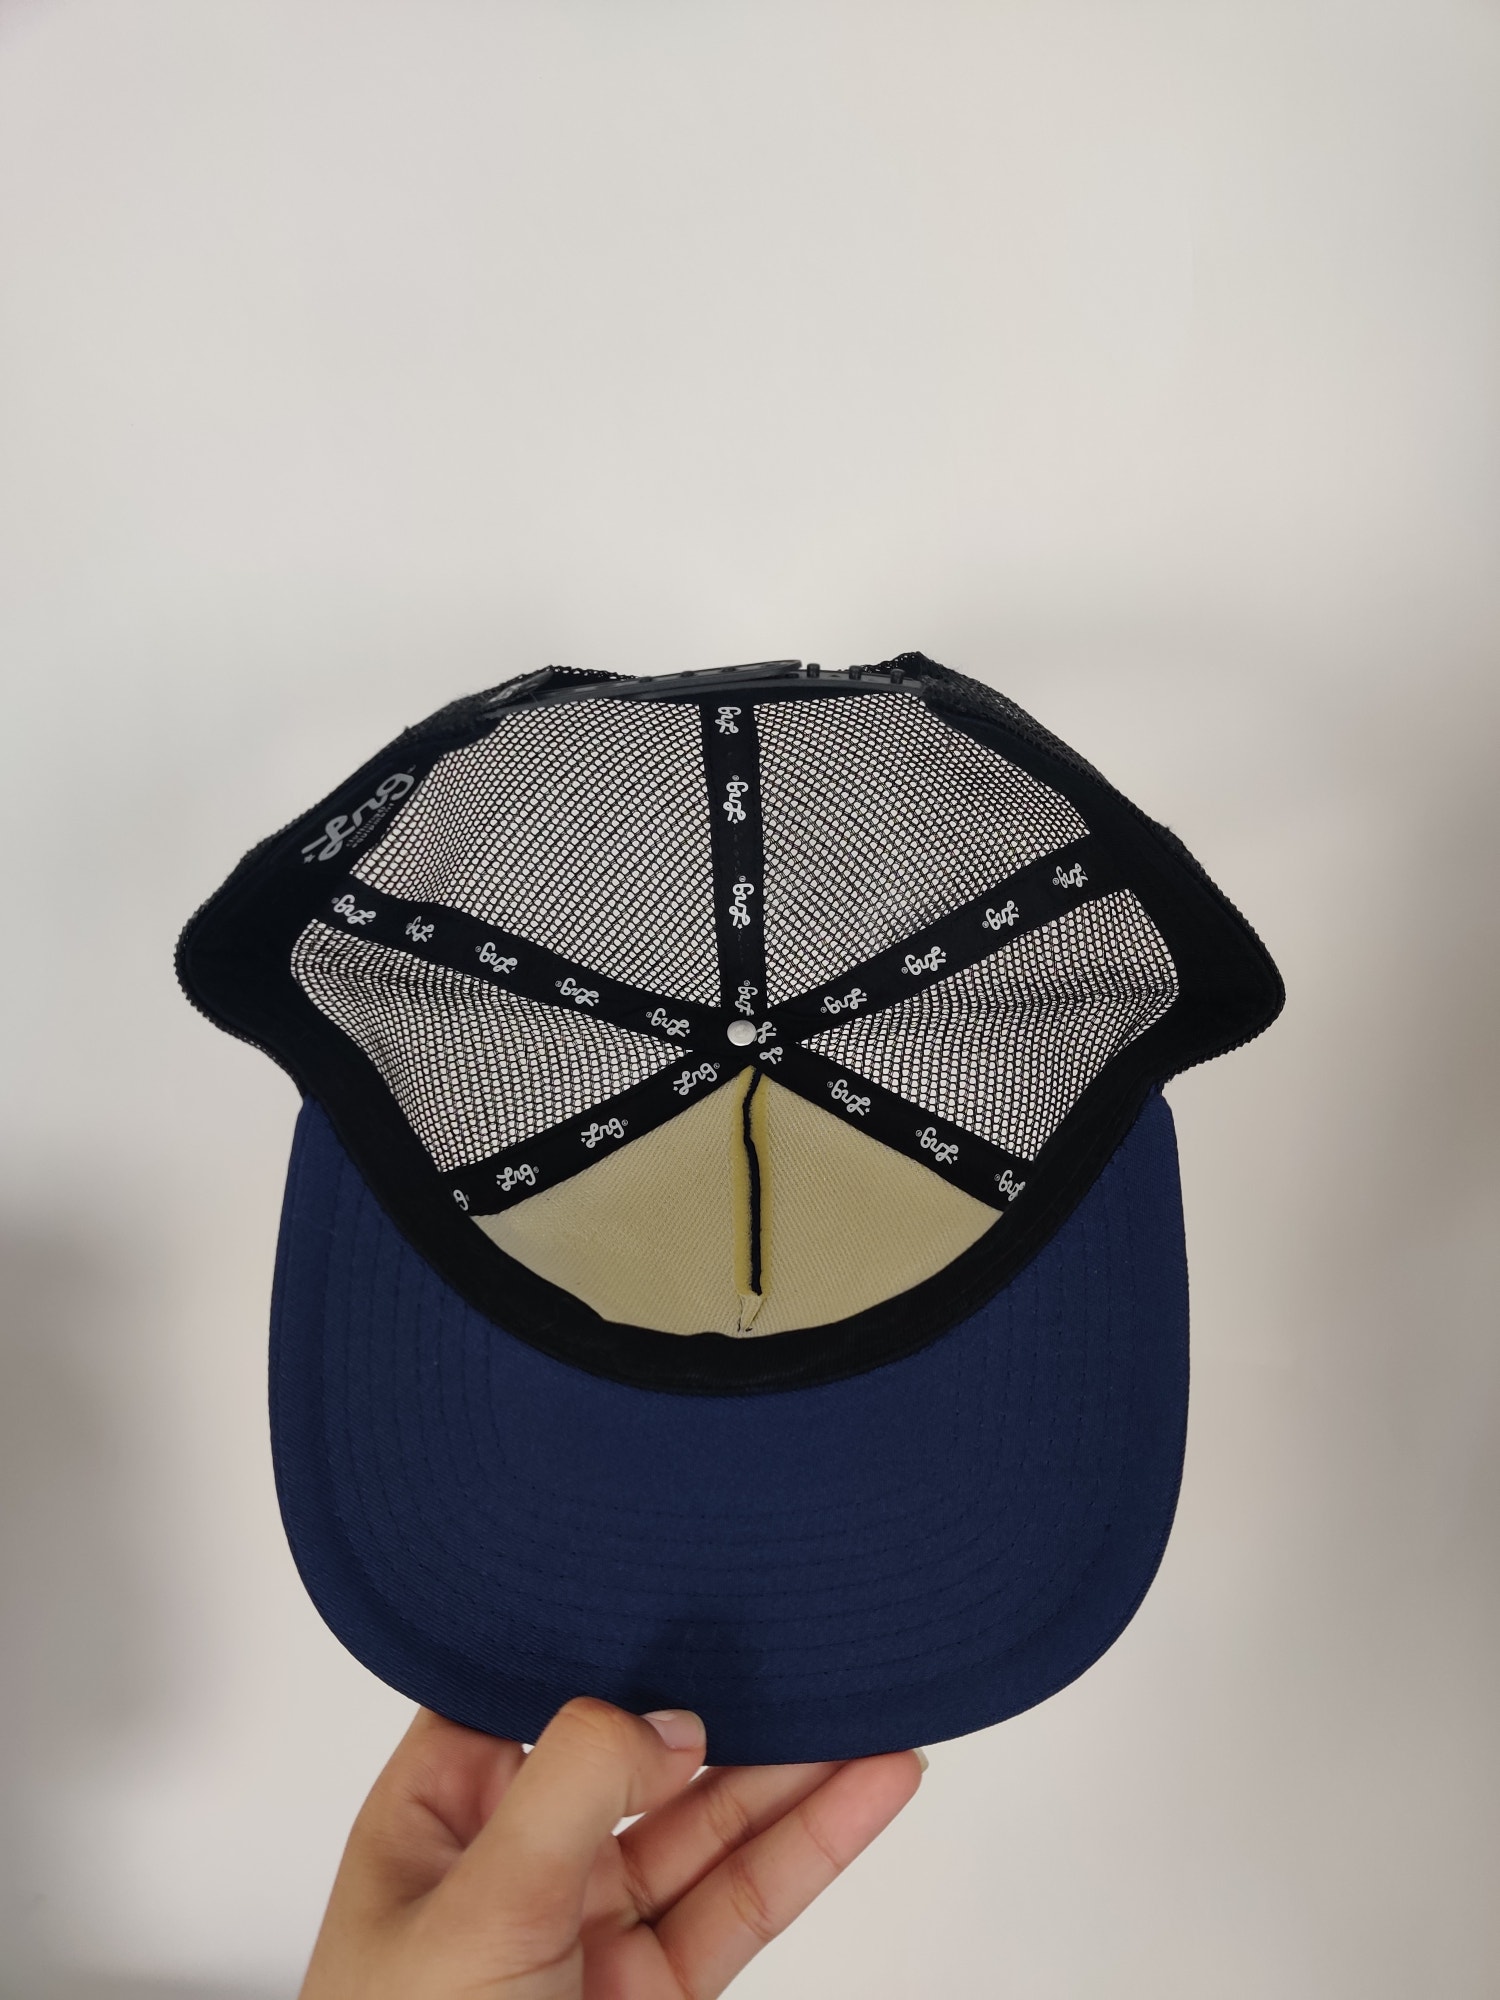 (V) ORIGINAL LRG Unisex hat hiking casual mesh back navy One size  - Picture 11 of 11